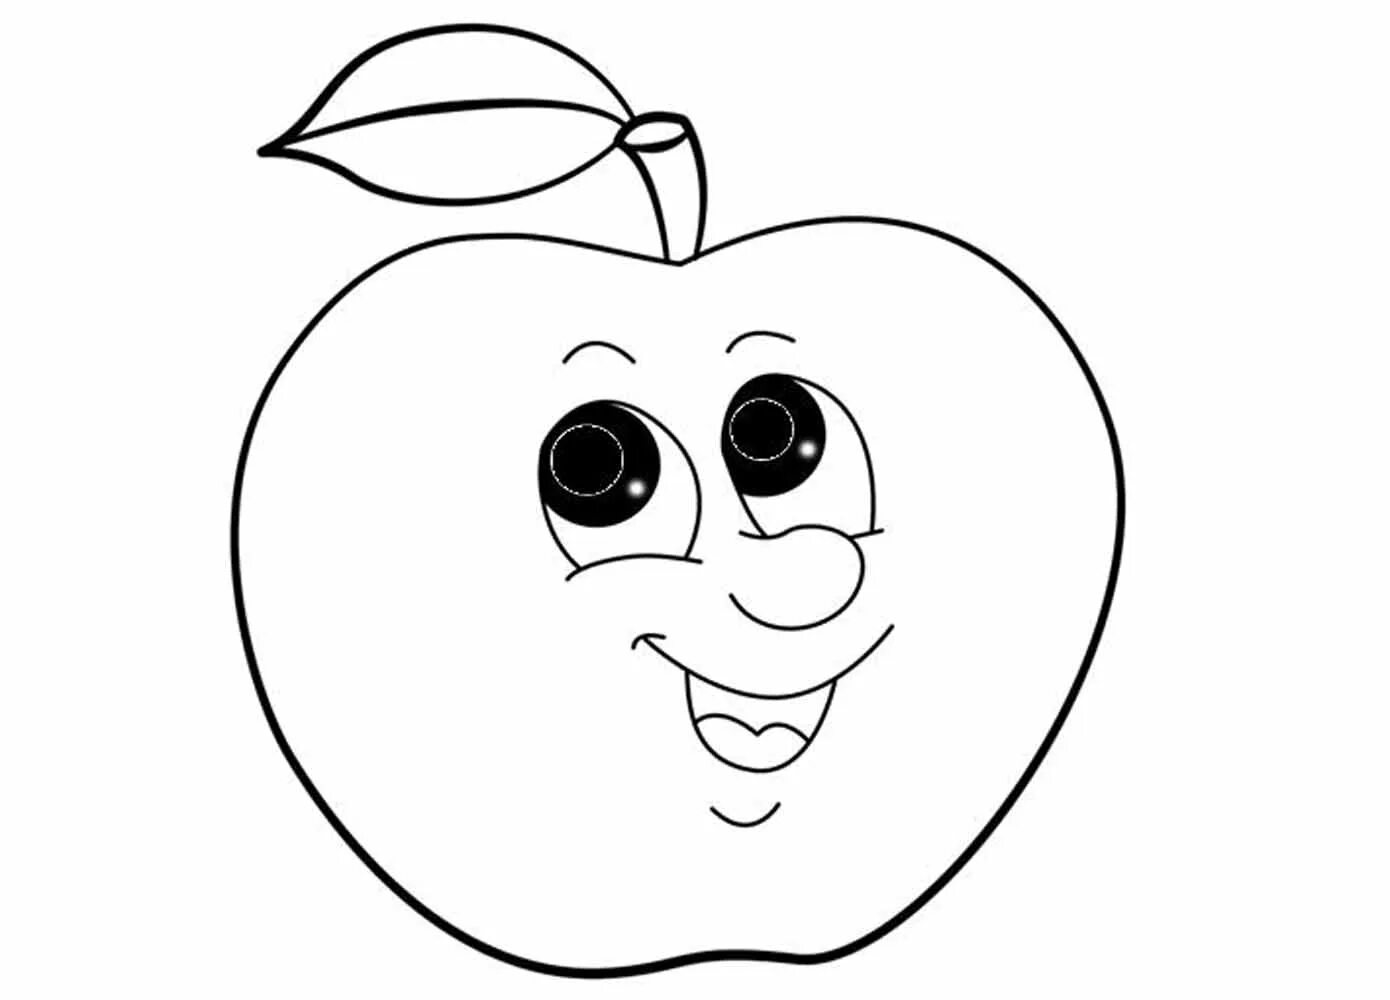 Apple drawing for kids #25